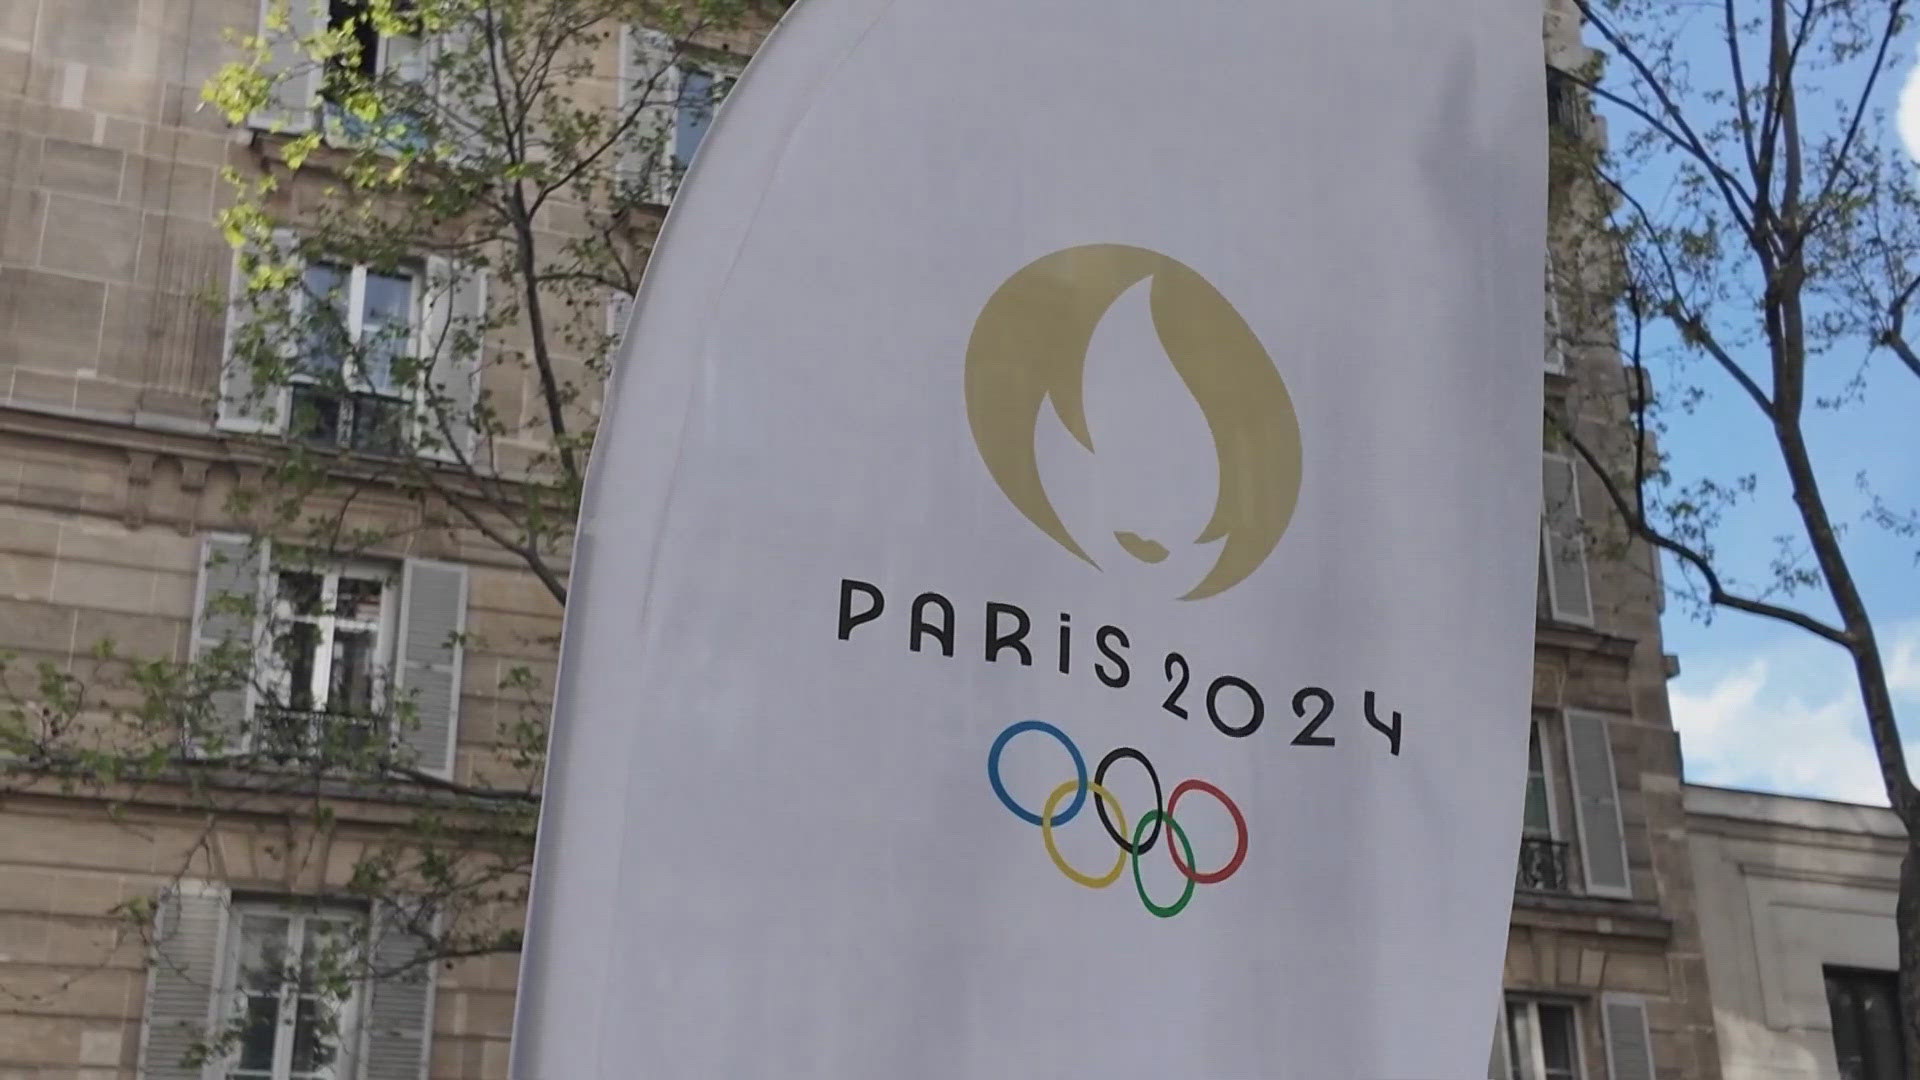 National climate reporter chase Cain takes us behind the scenes in Paris to show us how these Olympics hope to create a whole new kind of competition.